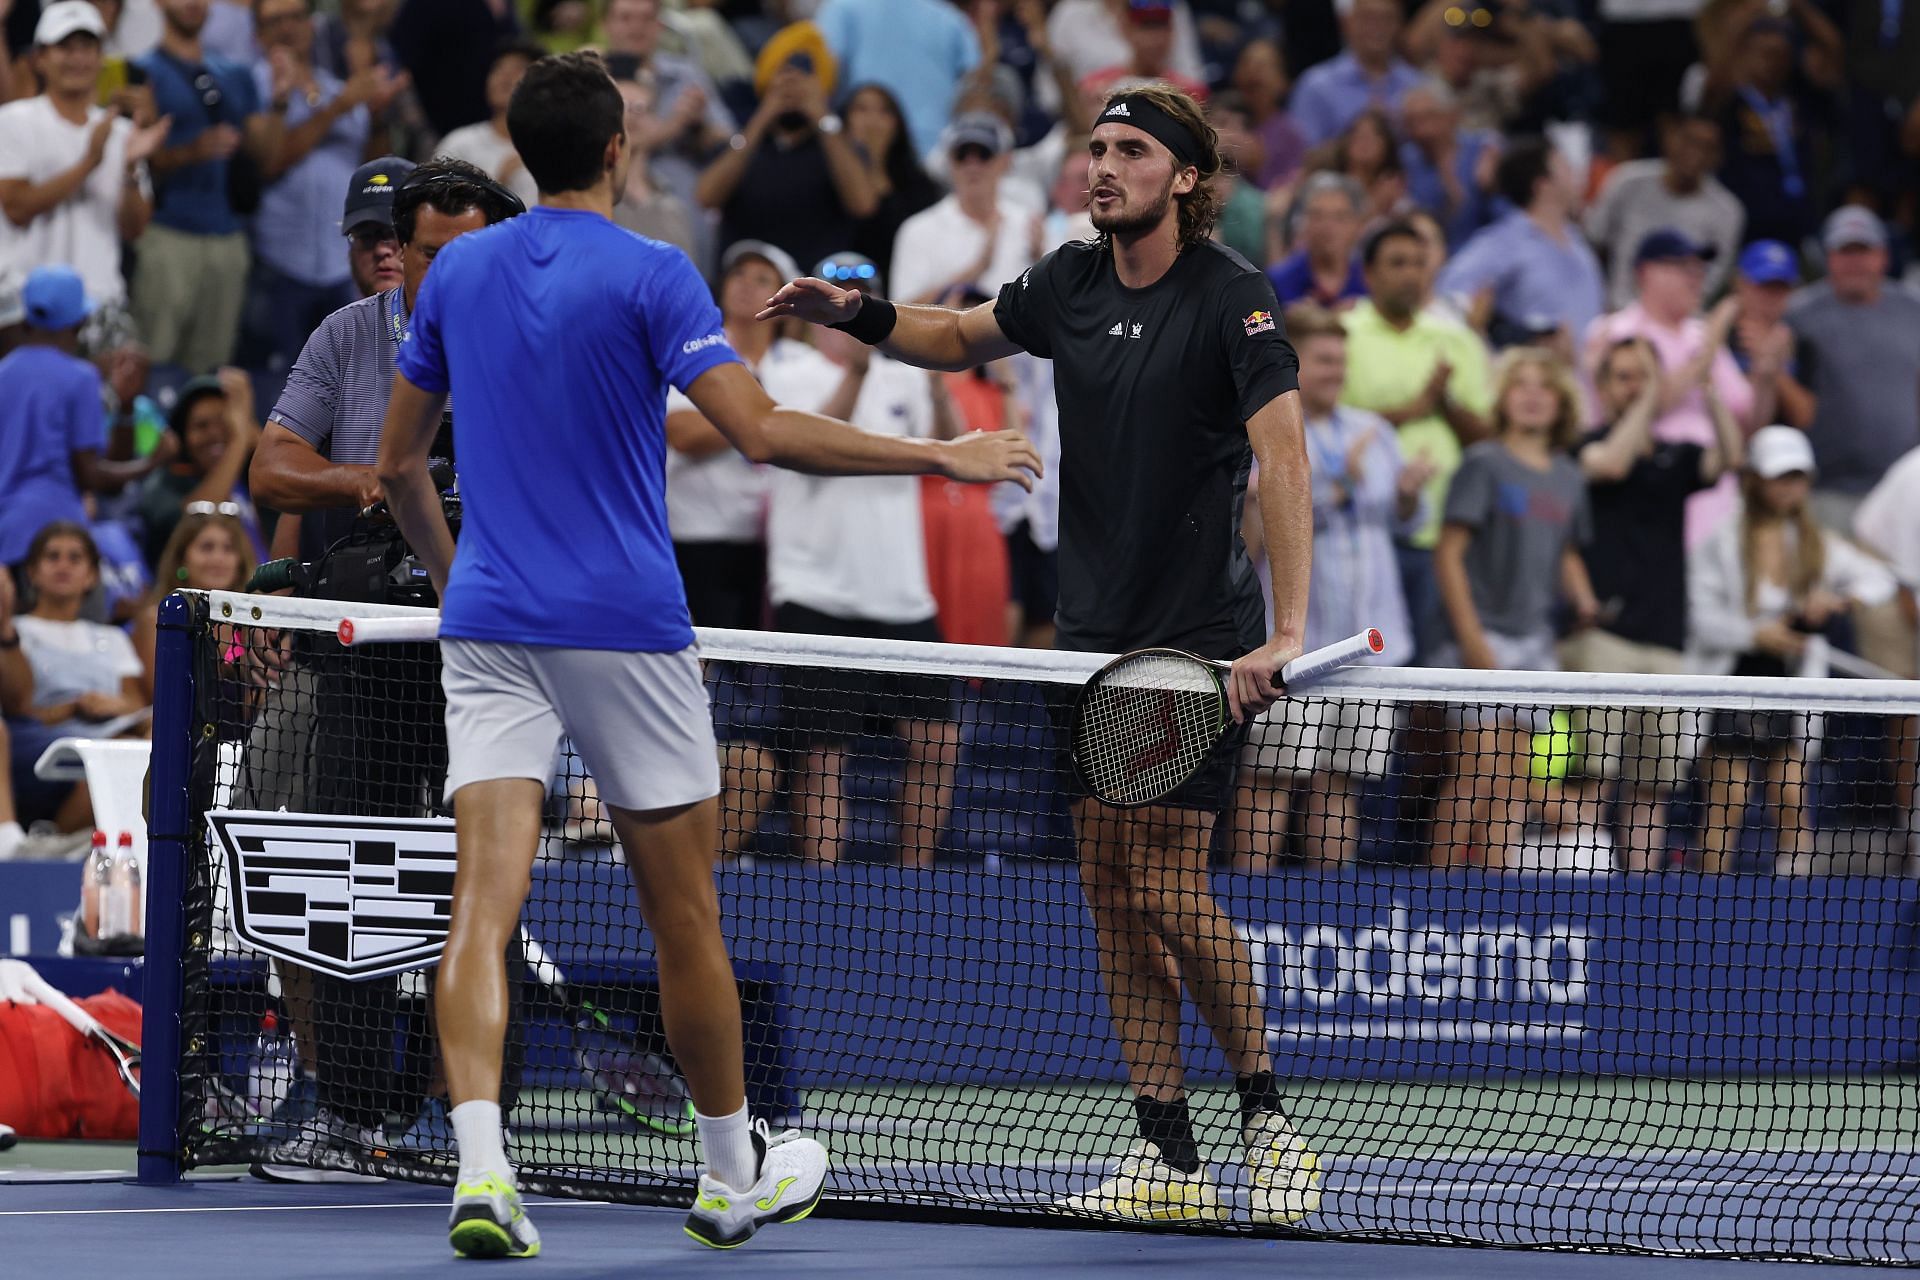 Stefanos Tsitsipas shakes hands with Daniel Elahi Galan after his defeat at the 2022 US Open